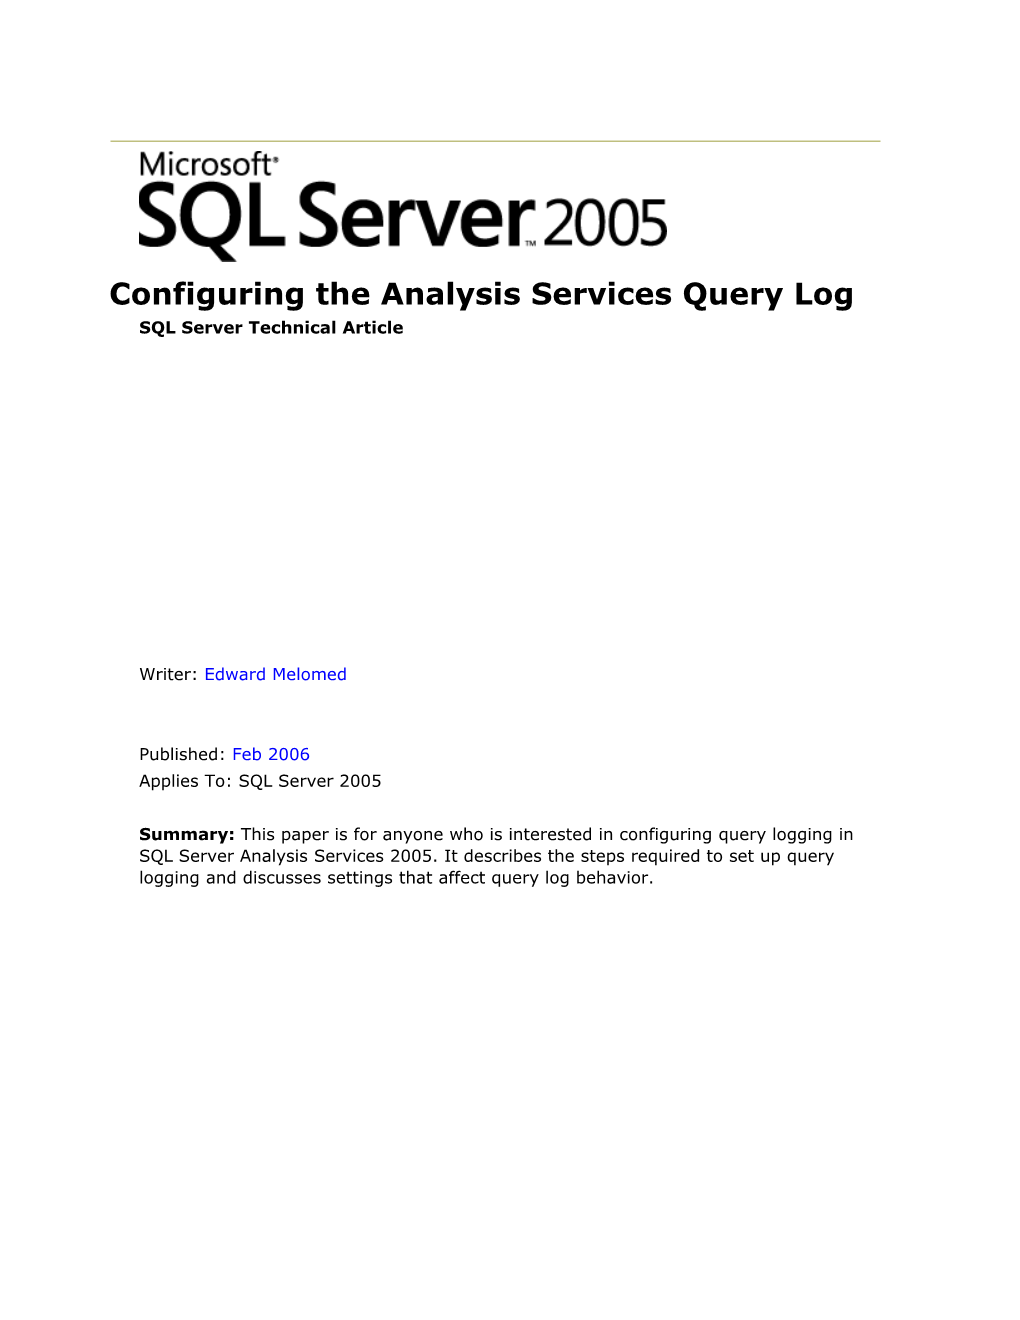 Configuring the Analysis Services Query Log